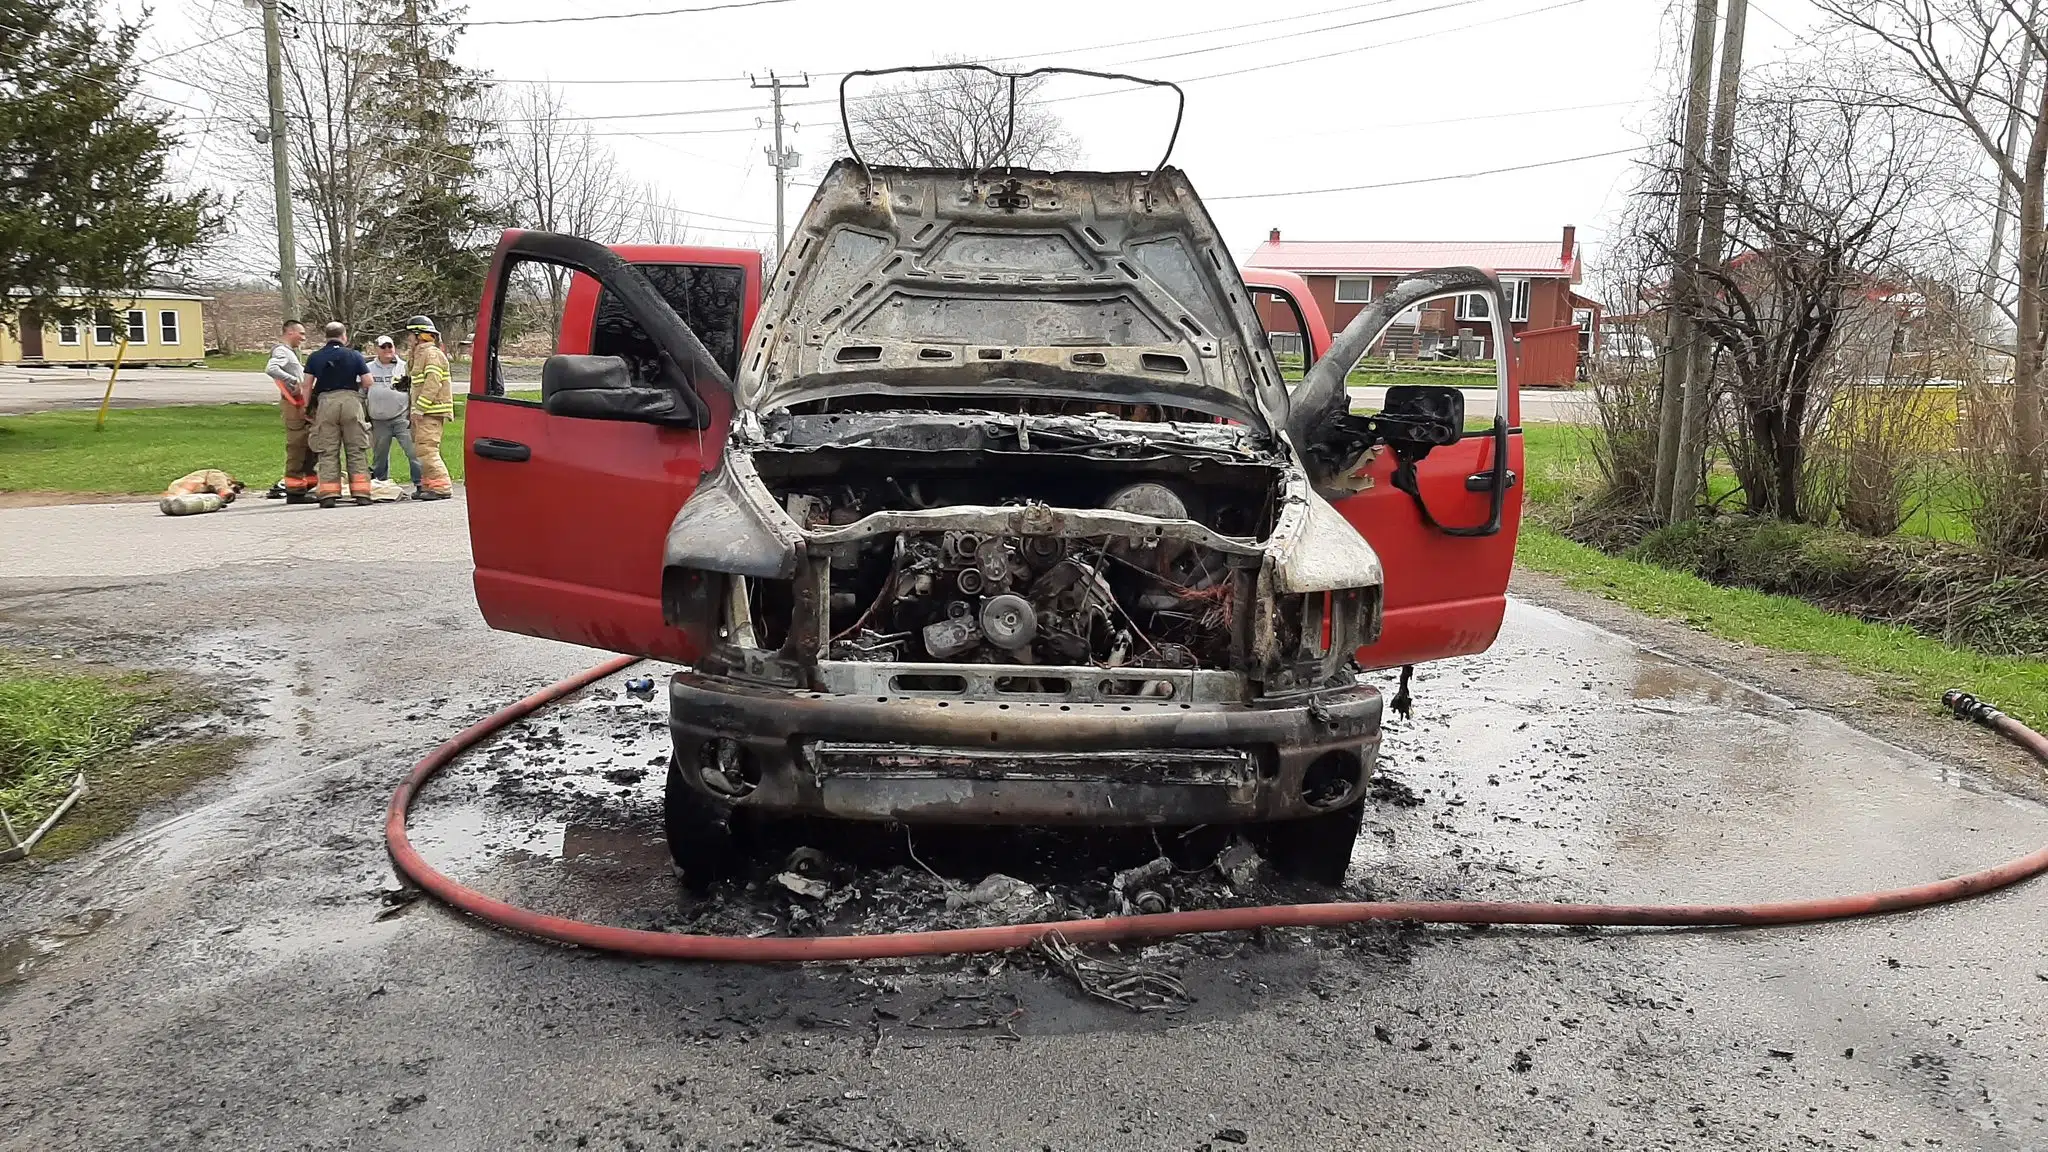 Pickup truck destroyed in vehicle fire